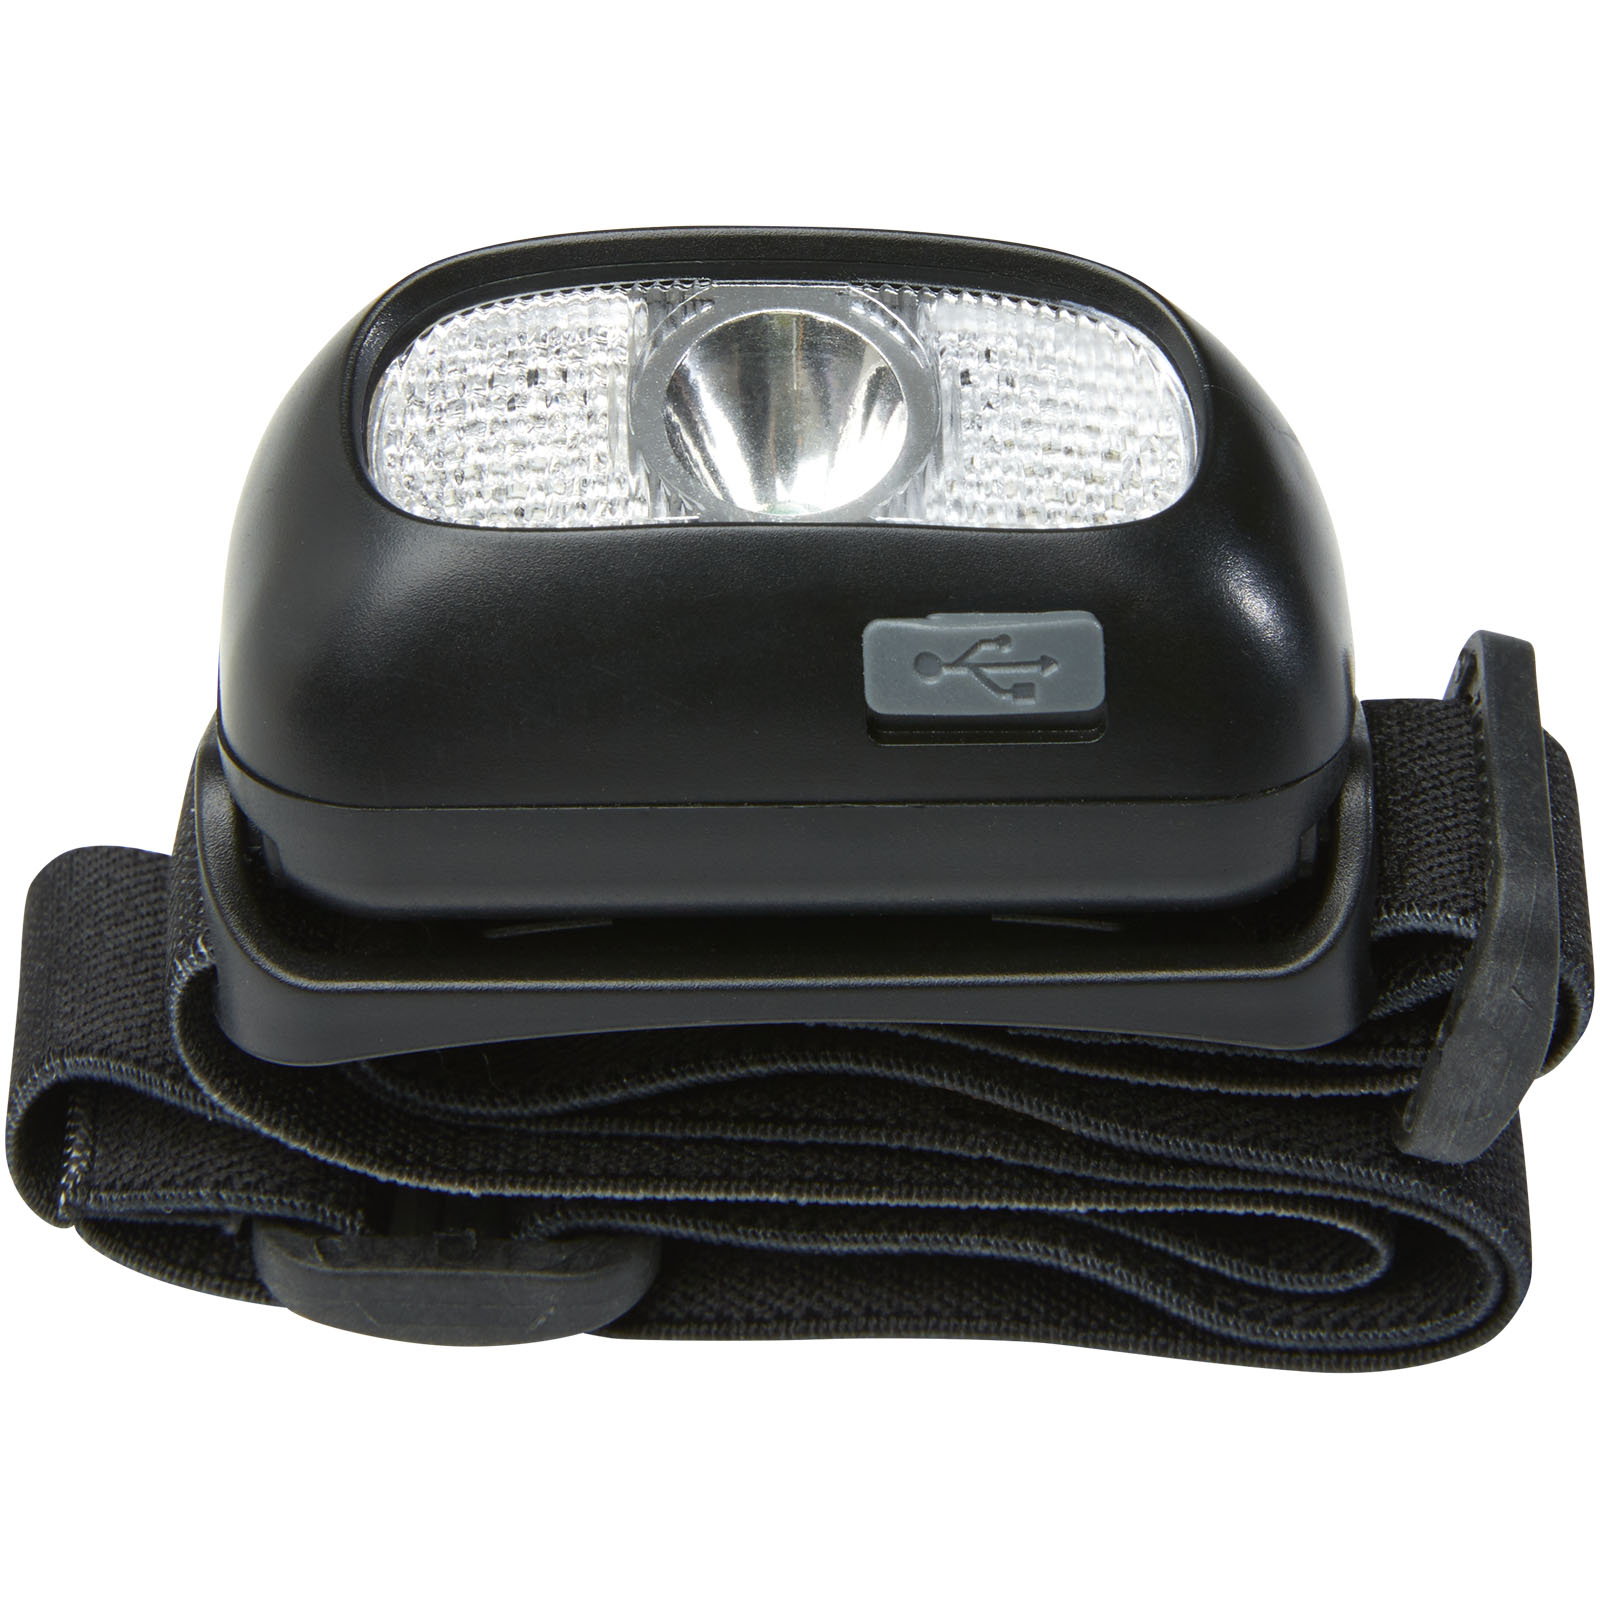 Advertising Lamps - Ray rechargeable headlight - 3